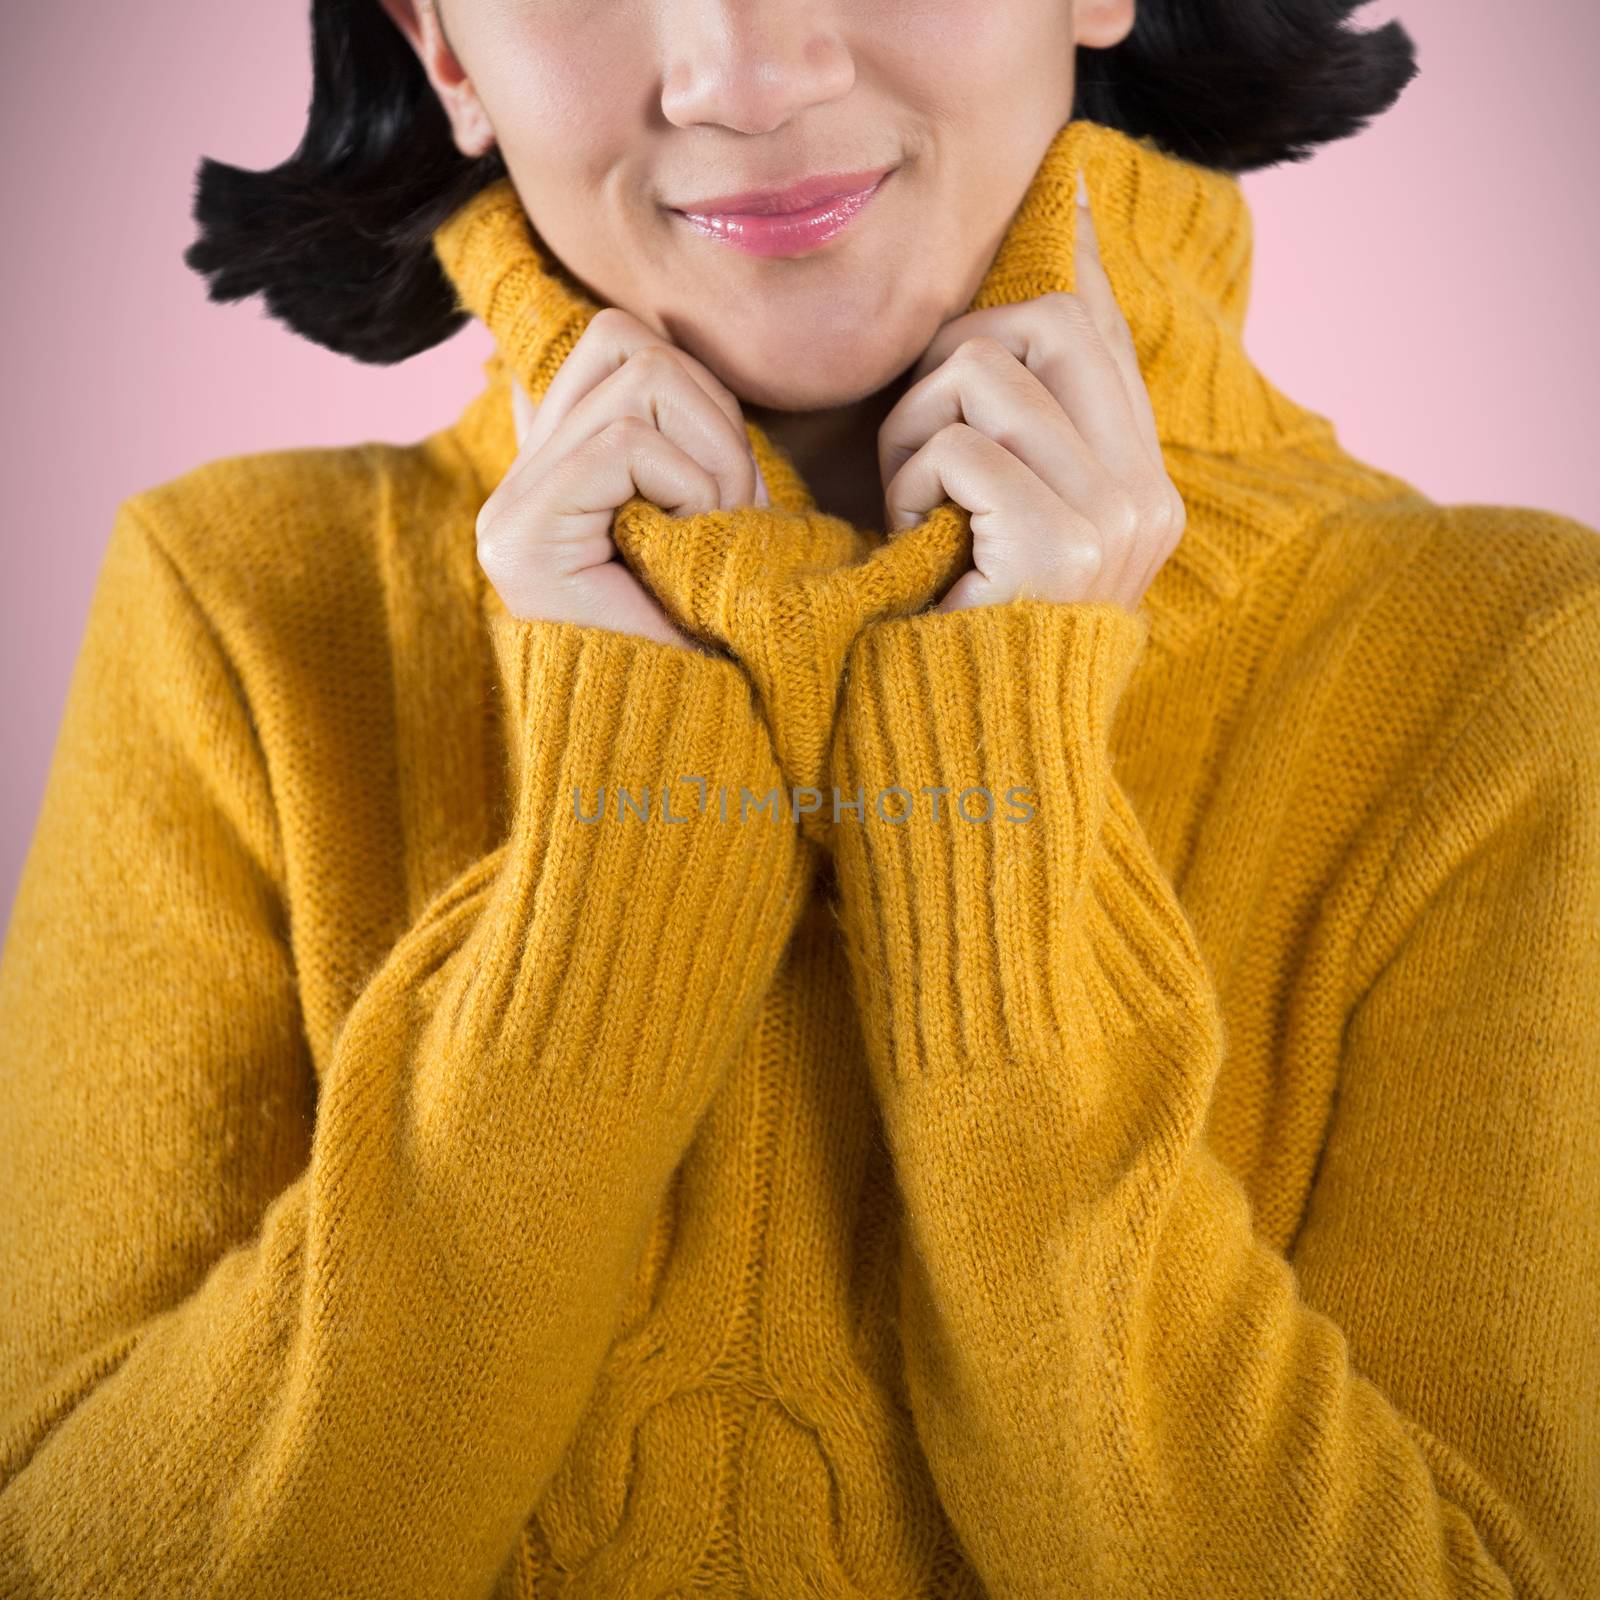 Woman in winter clothing posing against white background against pink background 